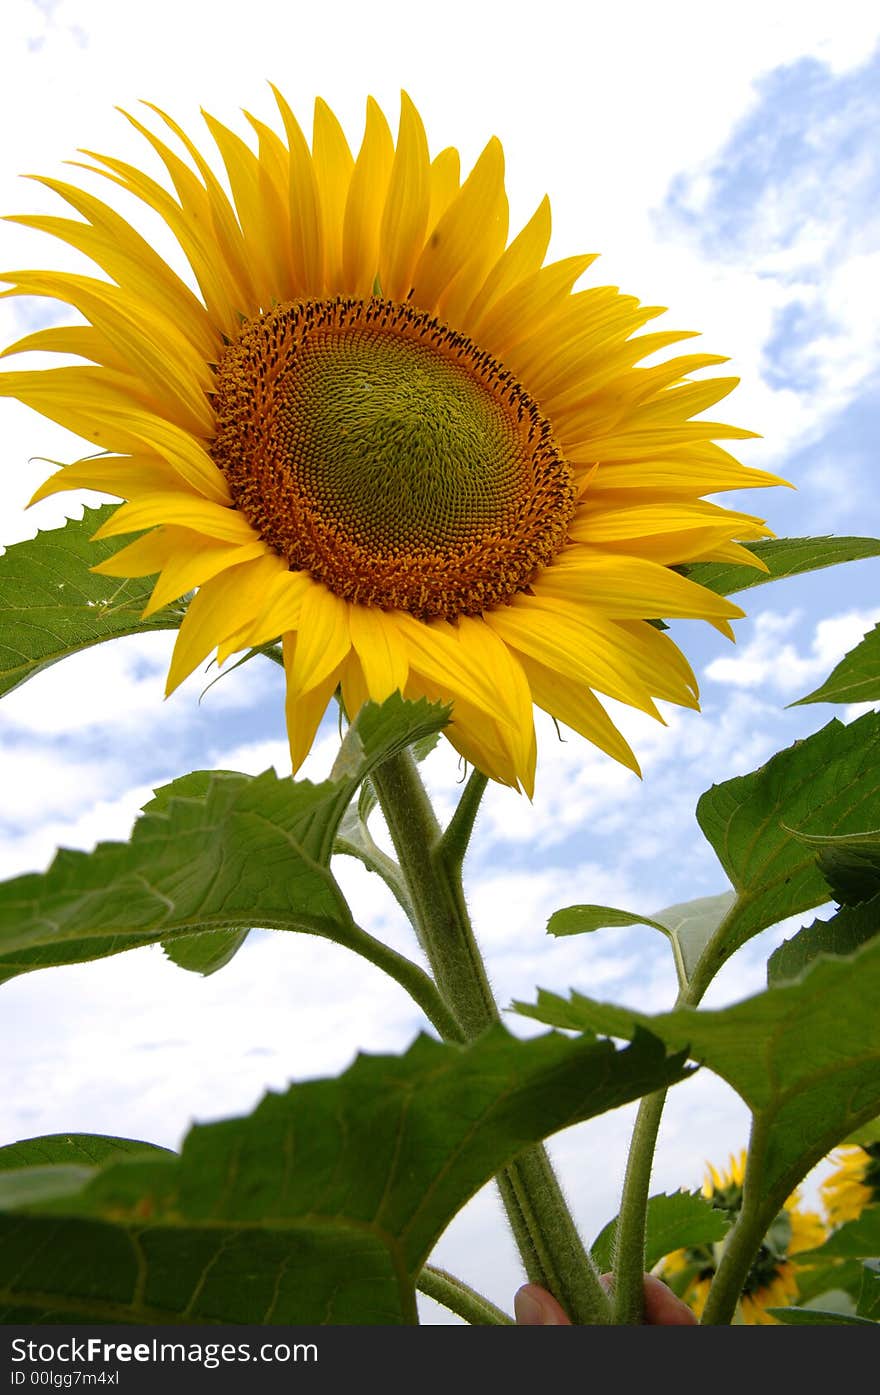 Joyous sunflower grow up on the meadow on the background of the sky